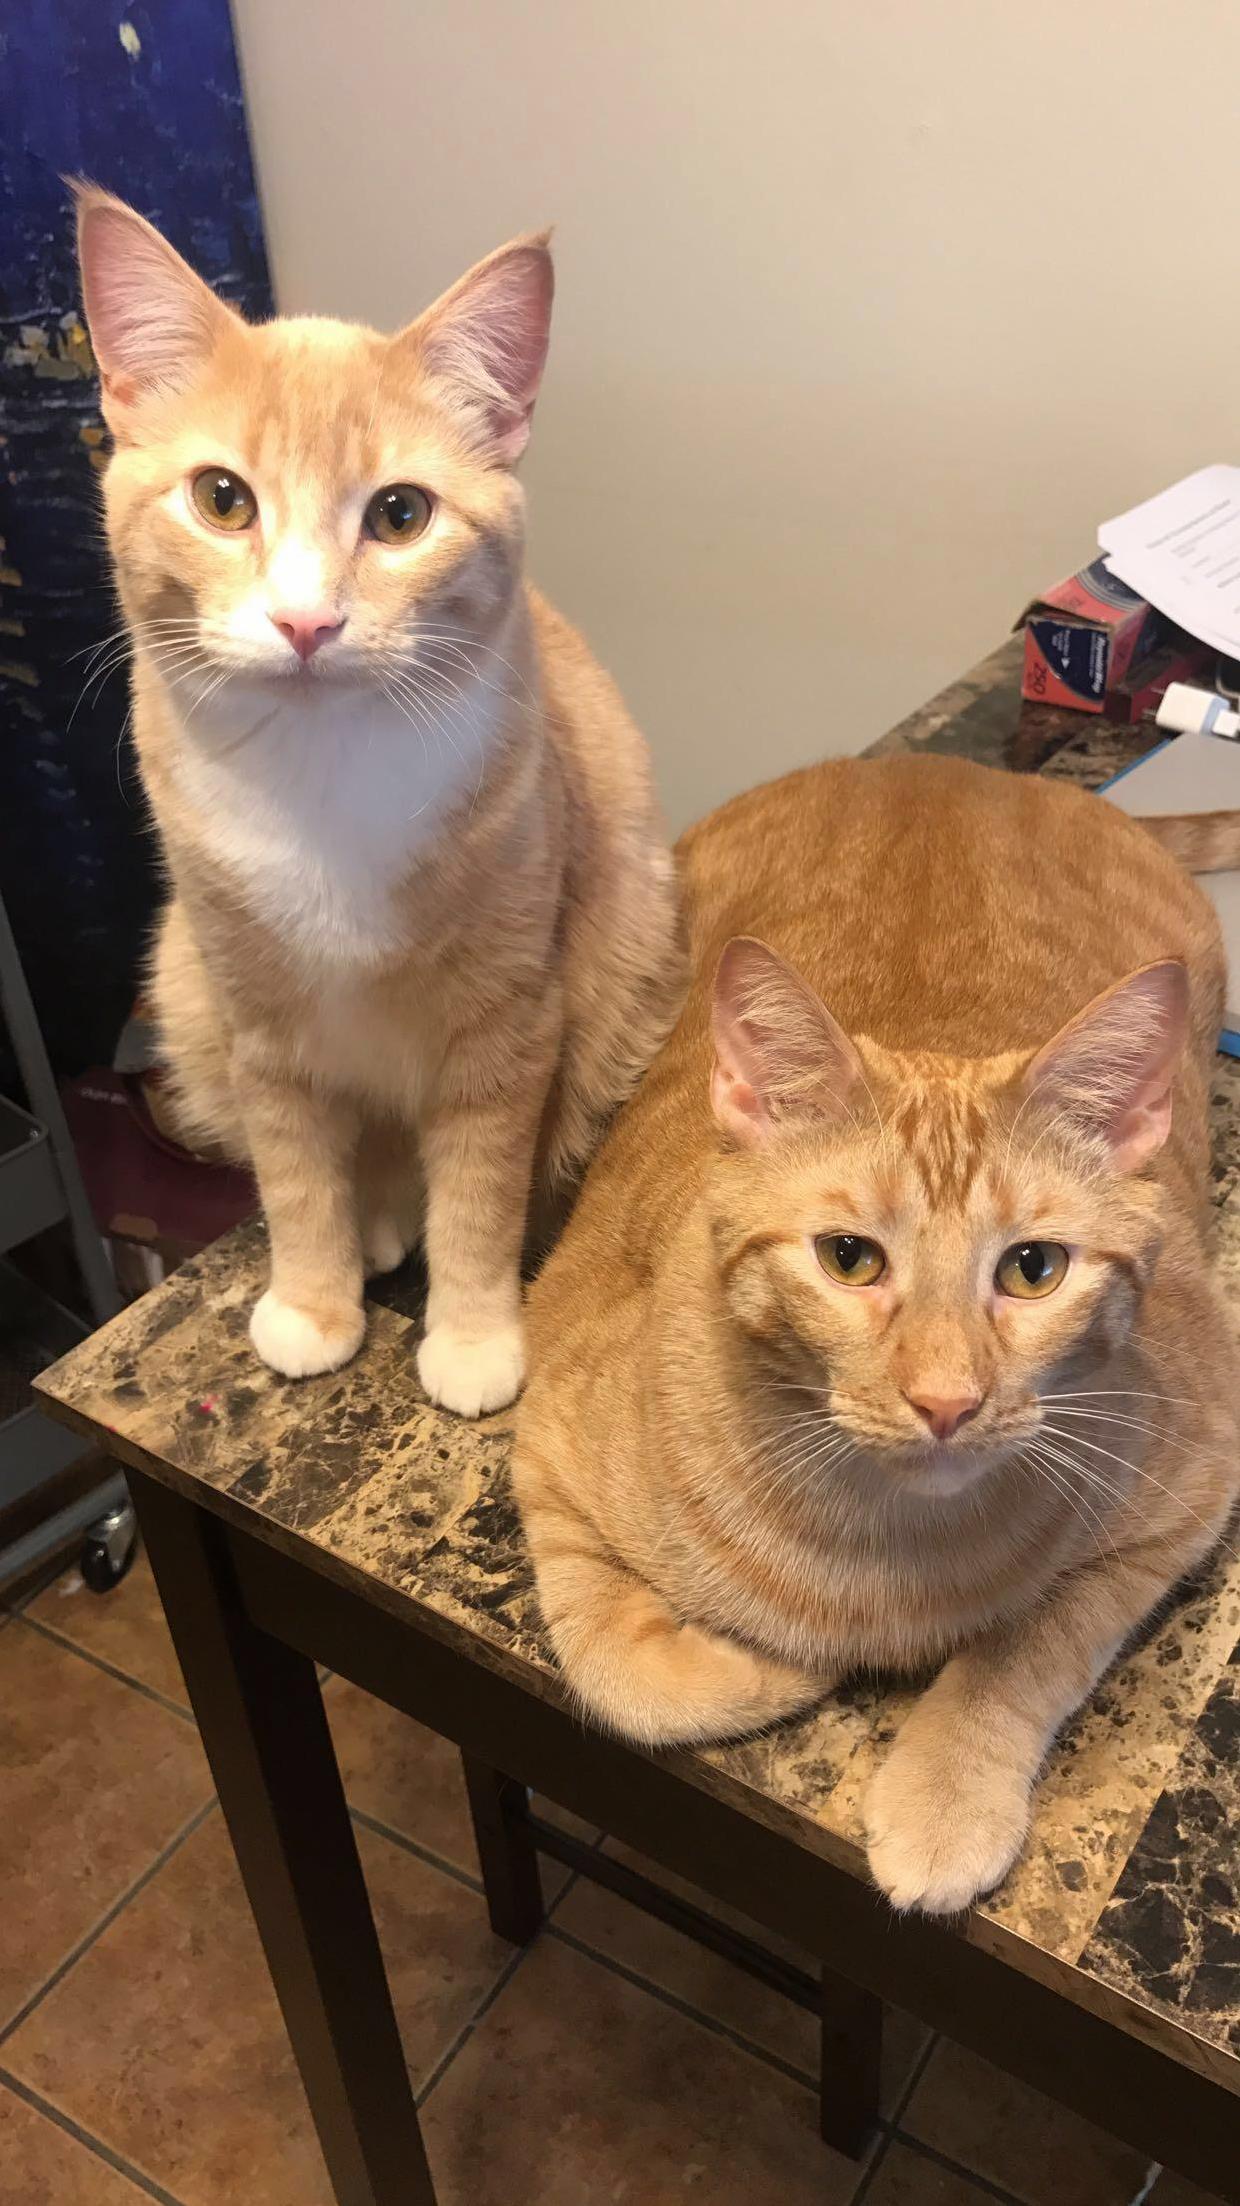 Gambit and beast like to hang out in the kitchen while i cook.